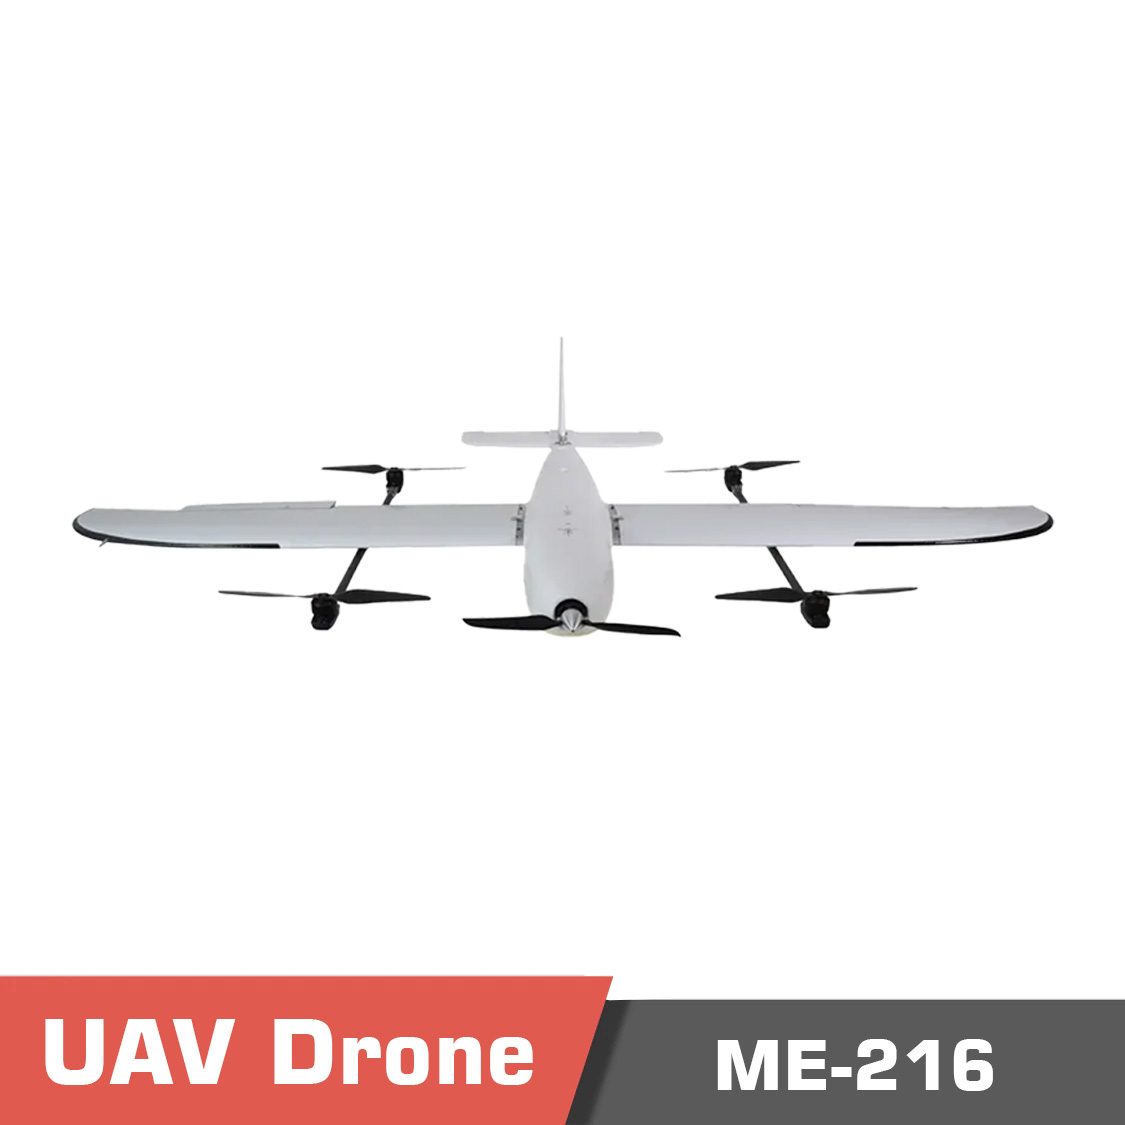 Template. Me 216jpg - vtol drone,akbaba m40,long endurance,fixedwing uav,t-tail,t-tail drone,cargo drone,wind resistance,detachable load,detachable payload,mapping drone,surveying drone,fixed-wing uav - motionew - 2